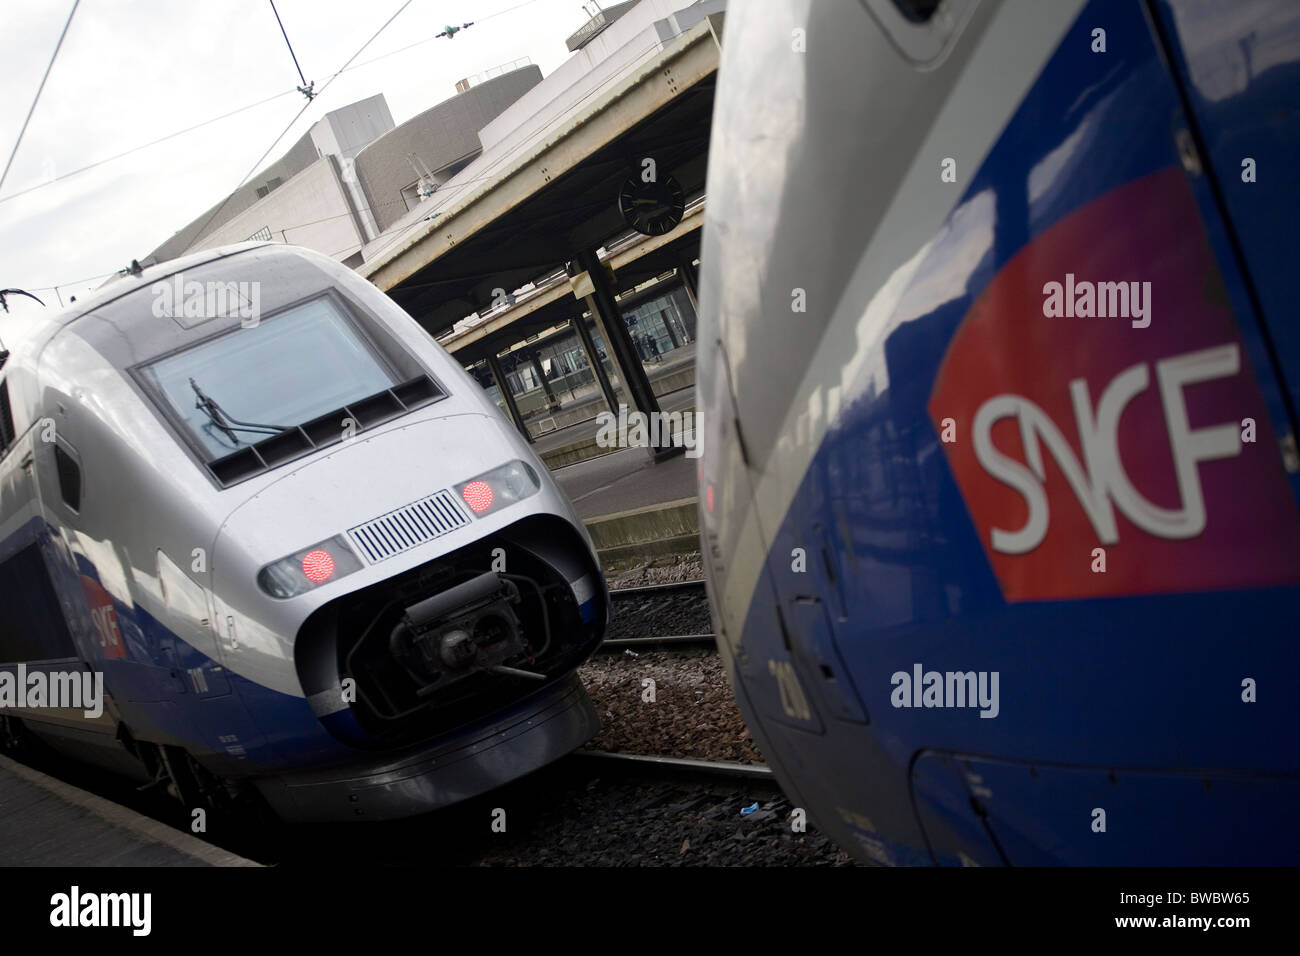 Two TGV trains, high-speed trains operated by the SNCF Stock Photo